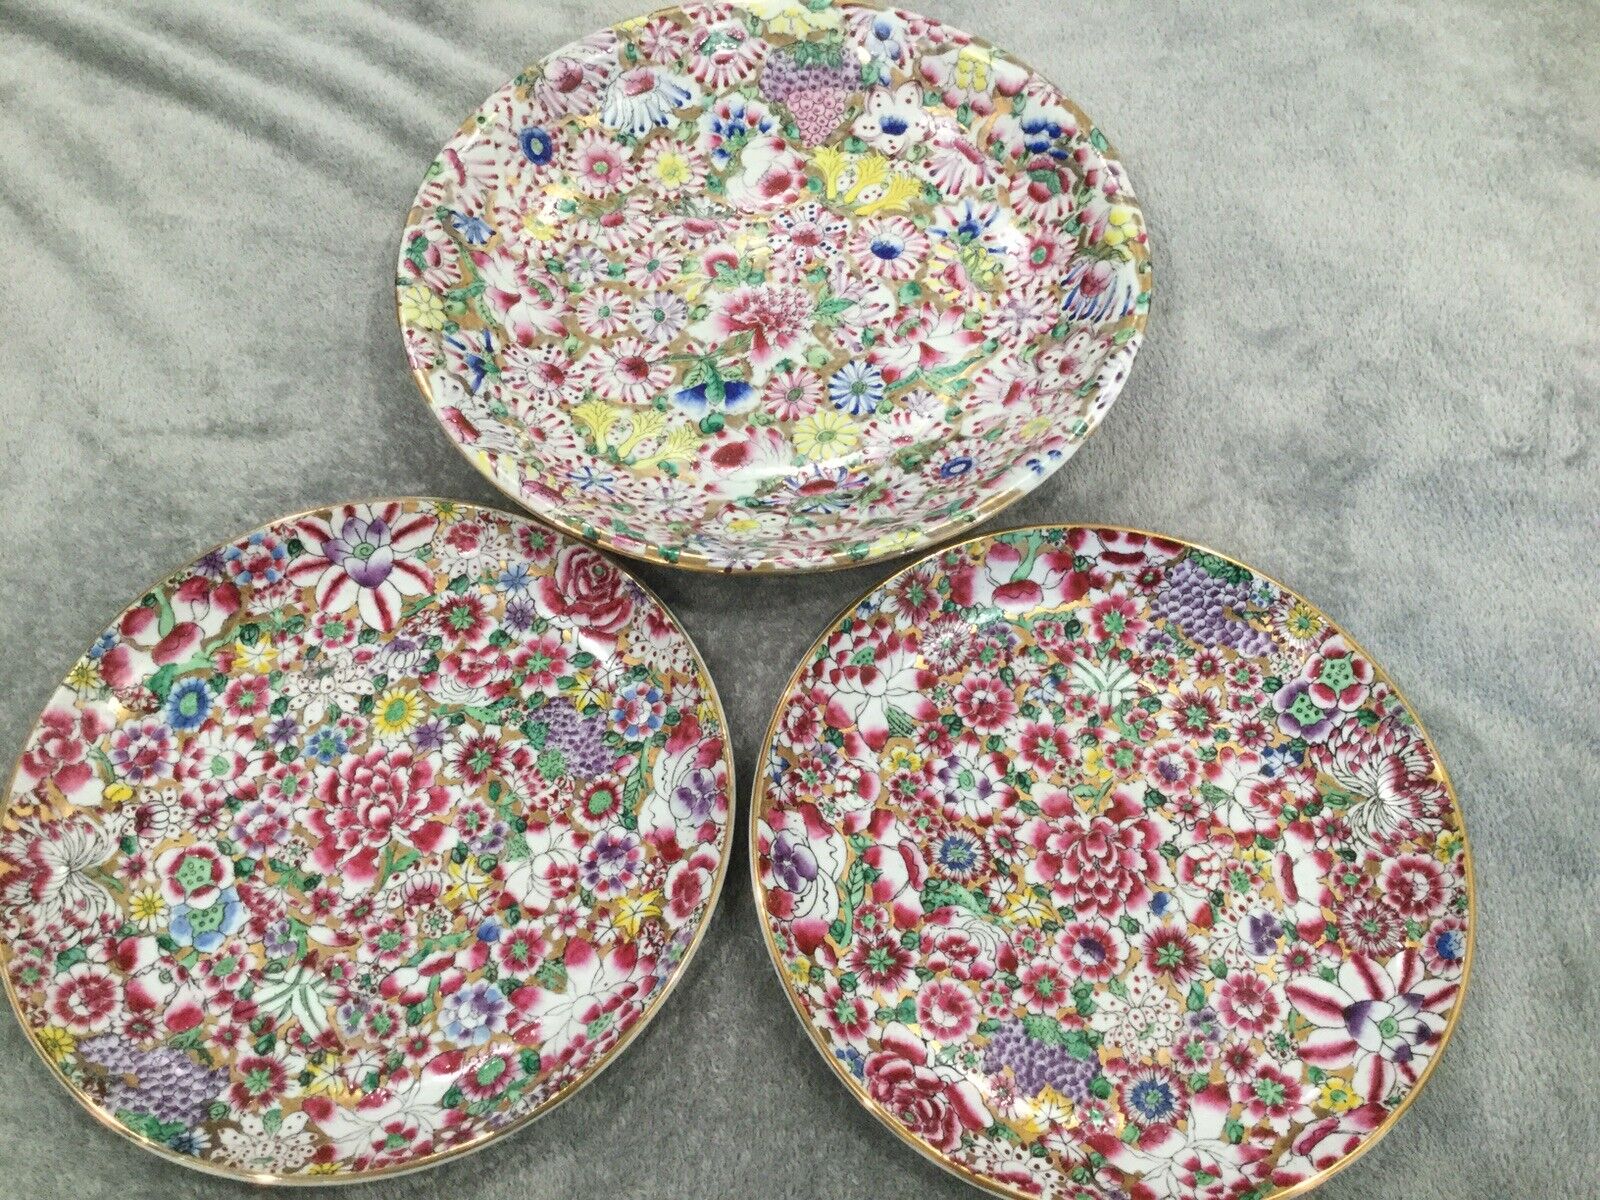 Vintage Chinese Handpainted 4 Character Mark ,Floral/gold Accents 2 Plates,Bowl.